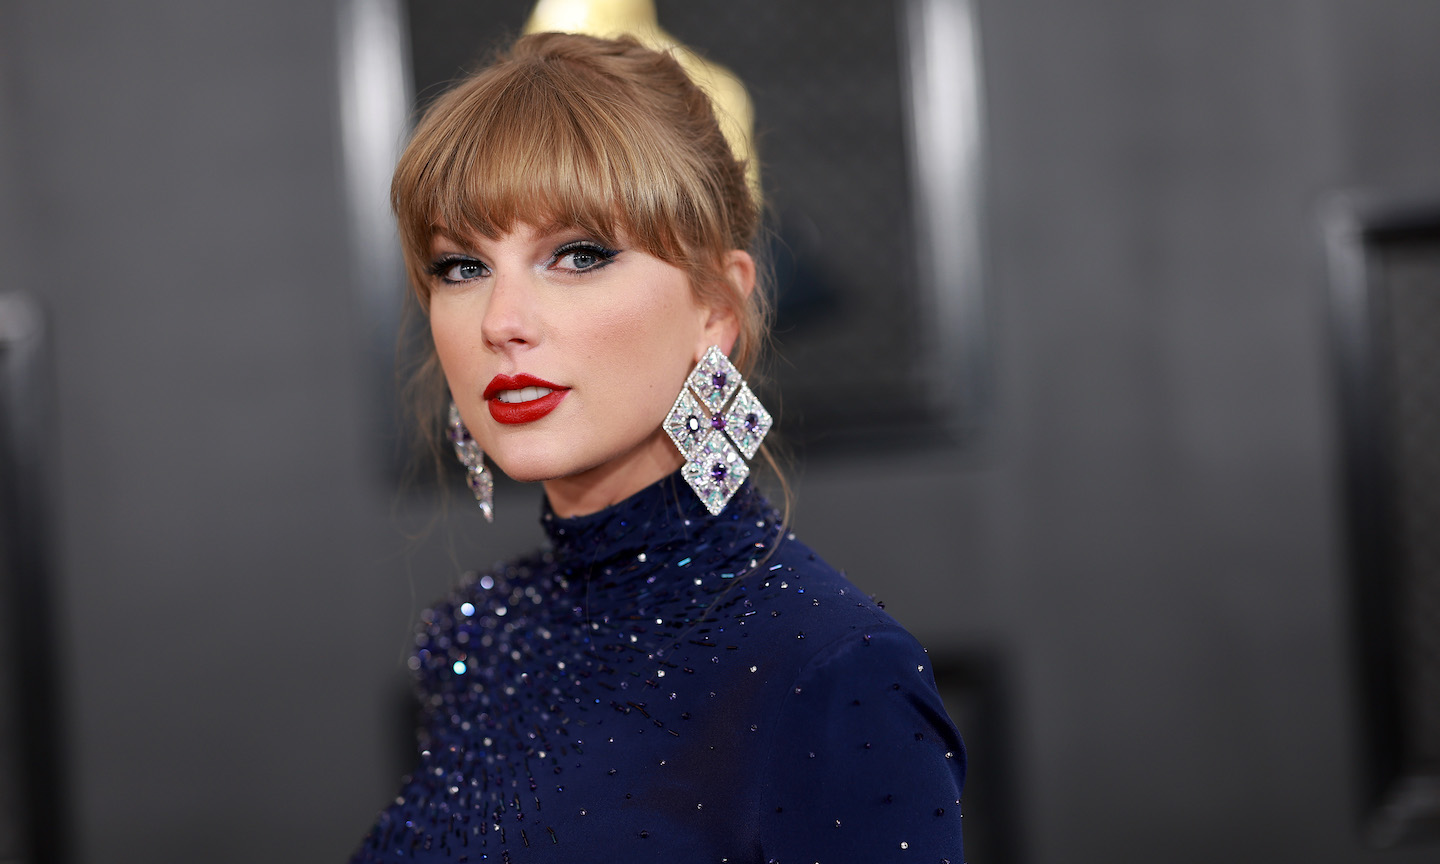 Taylor Swift drops 4 previously unreleased songs - Good Morning